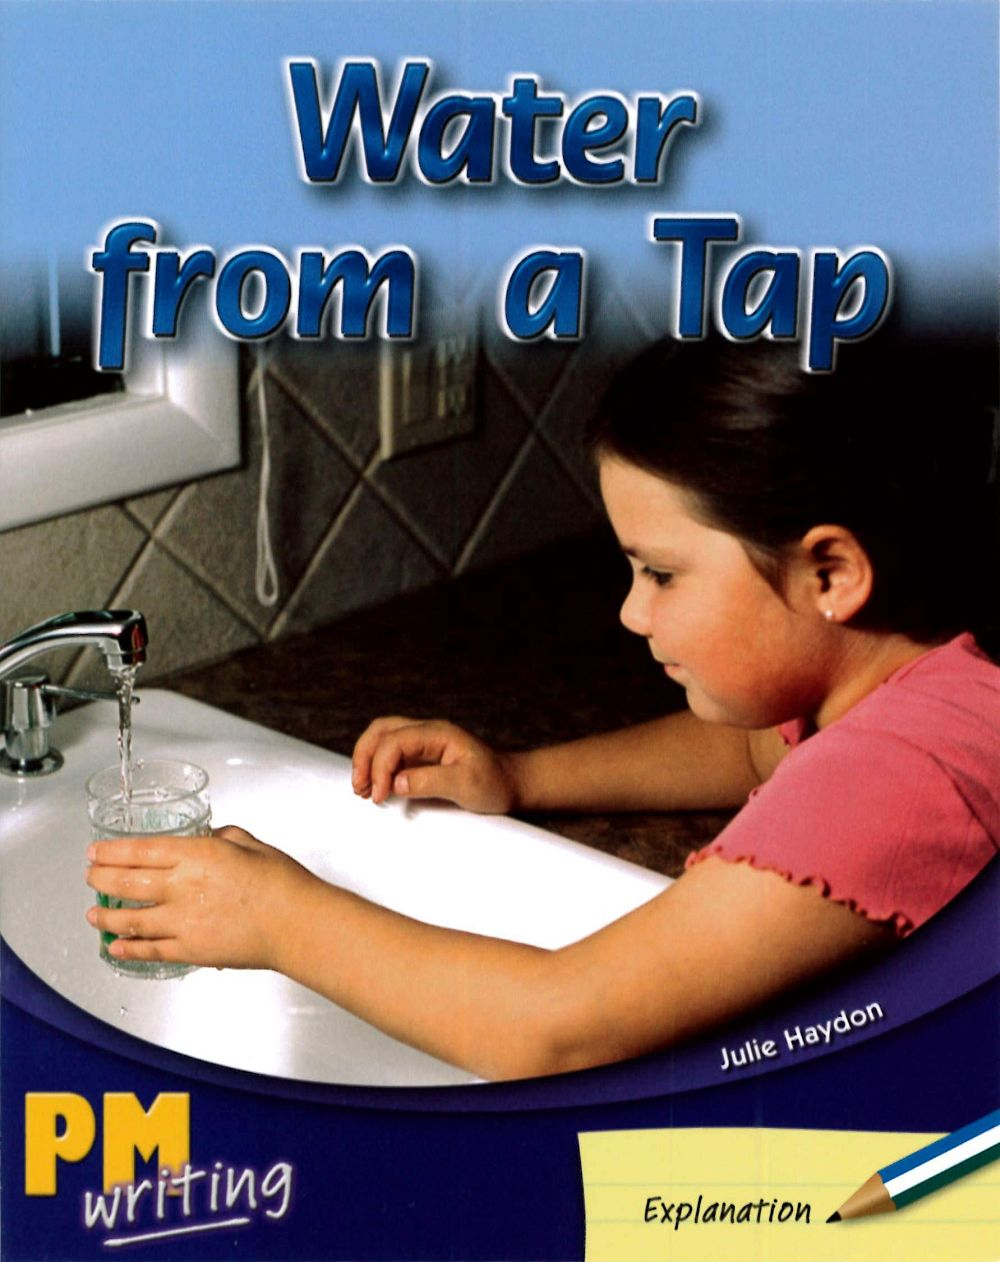 PM Writing 1 Blue/Green 11/12 Water from a Tap